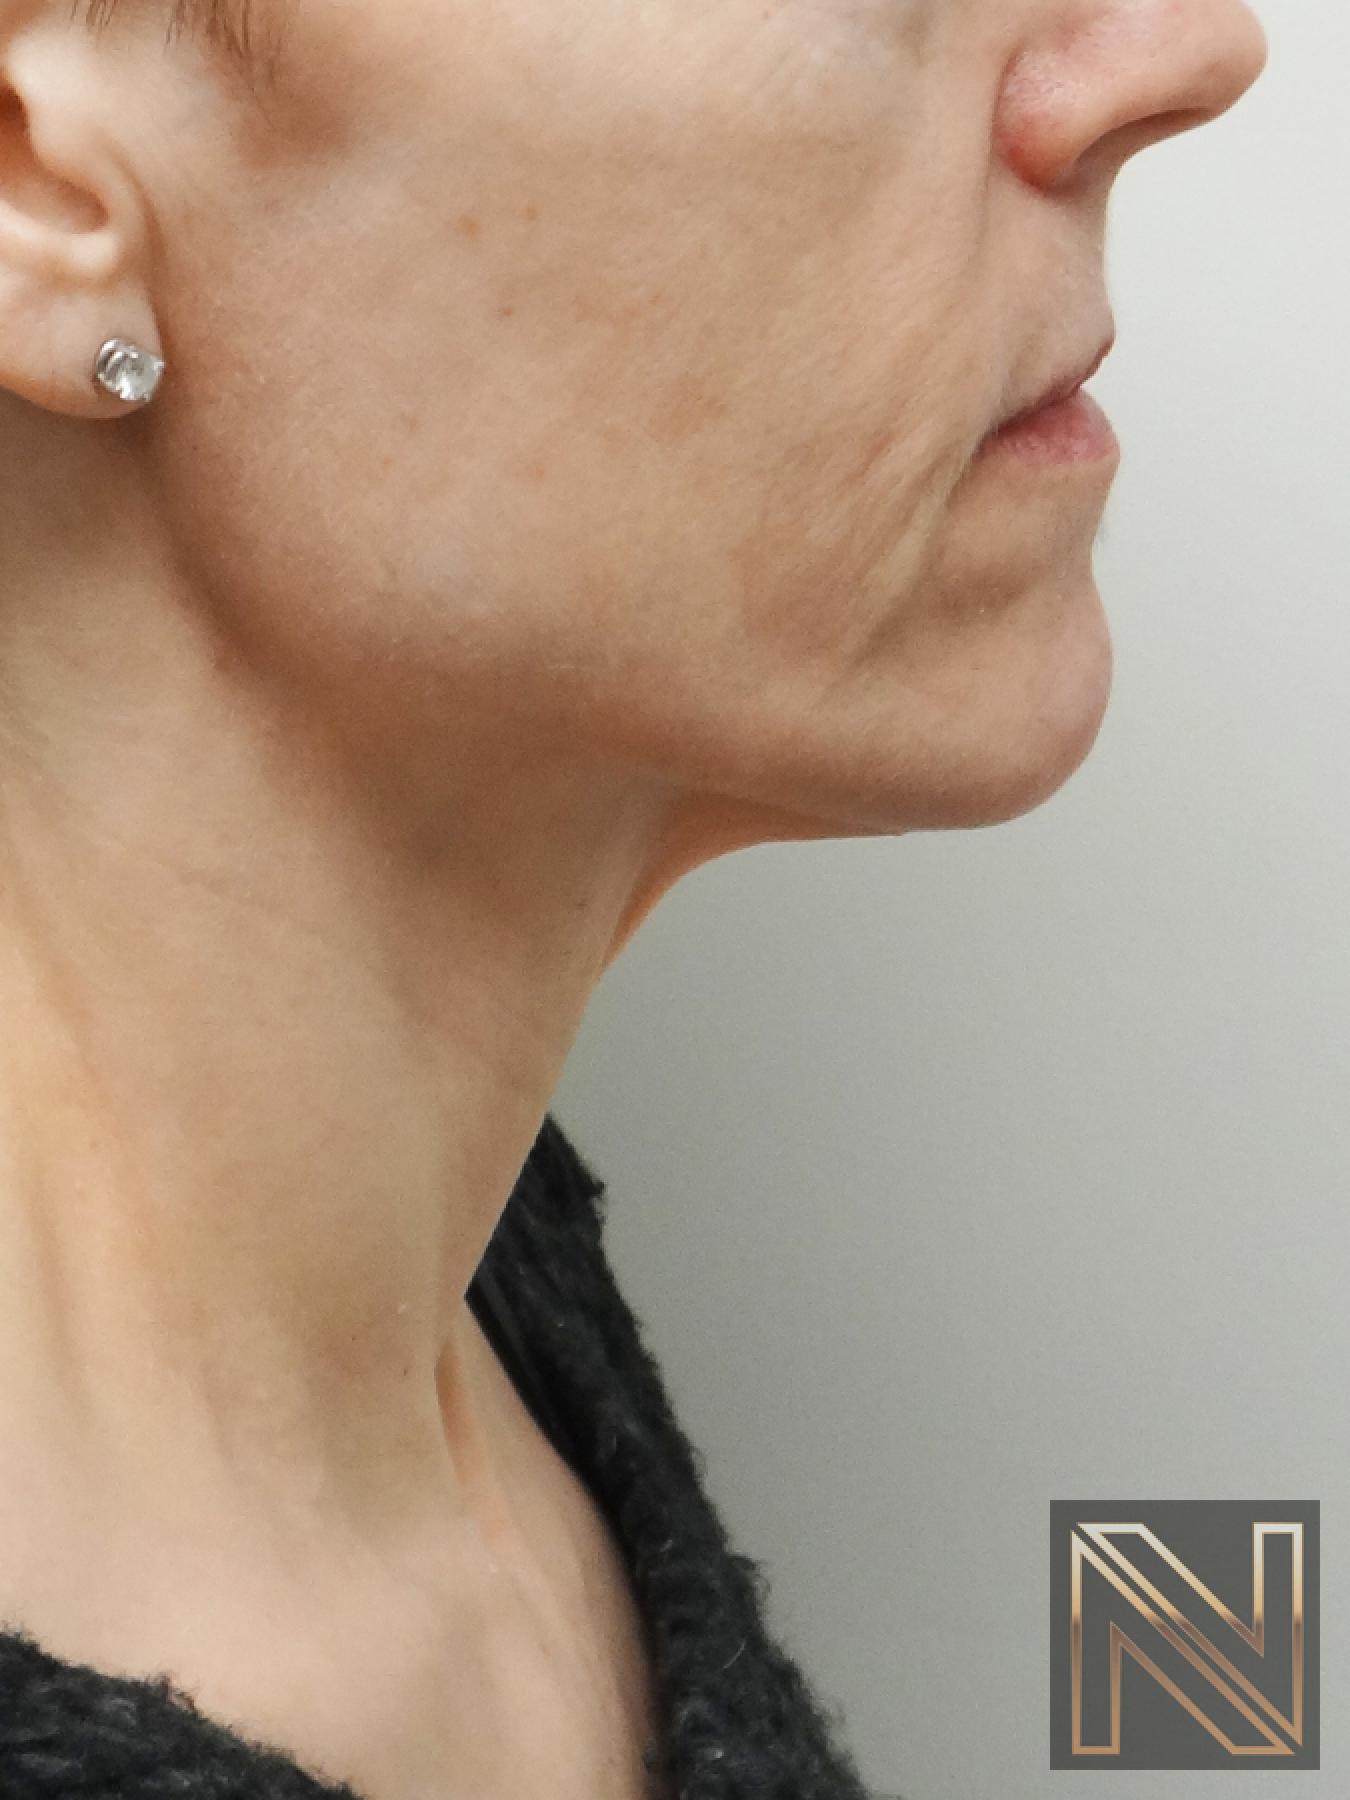 Ultherapy®: Patient 1 - Before and After 2